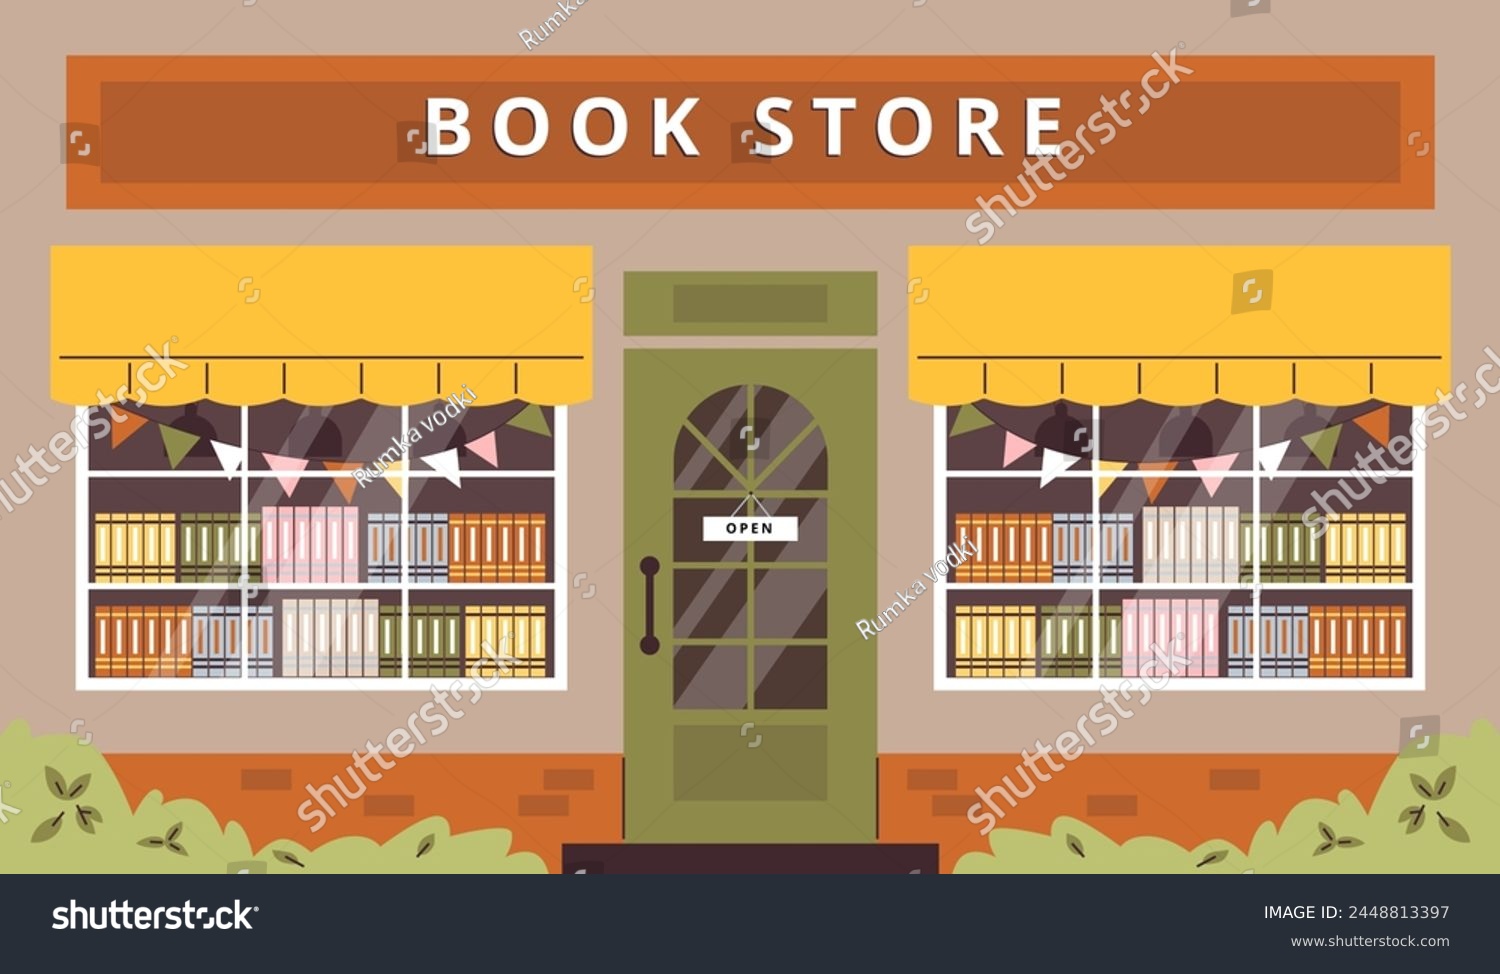 SVG of An inviting bookstore facade with colorful awnings and a welcoming 'Open' sign, depicted in a charming and quaint vector illustration style. svg